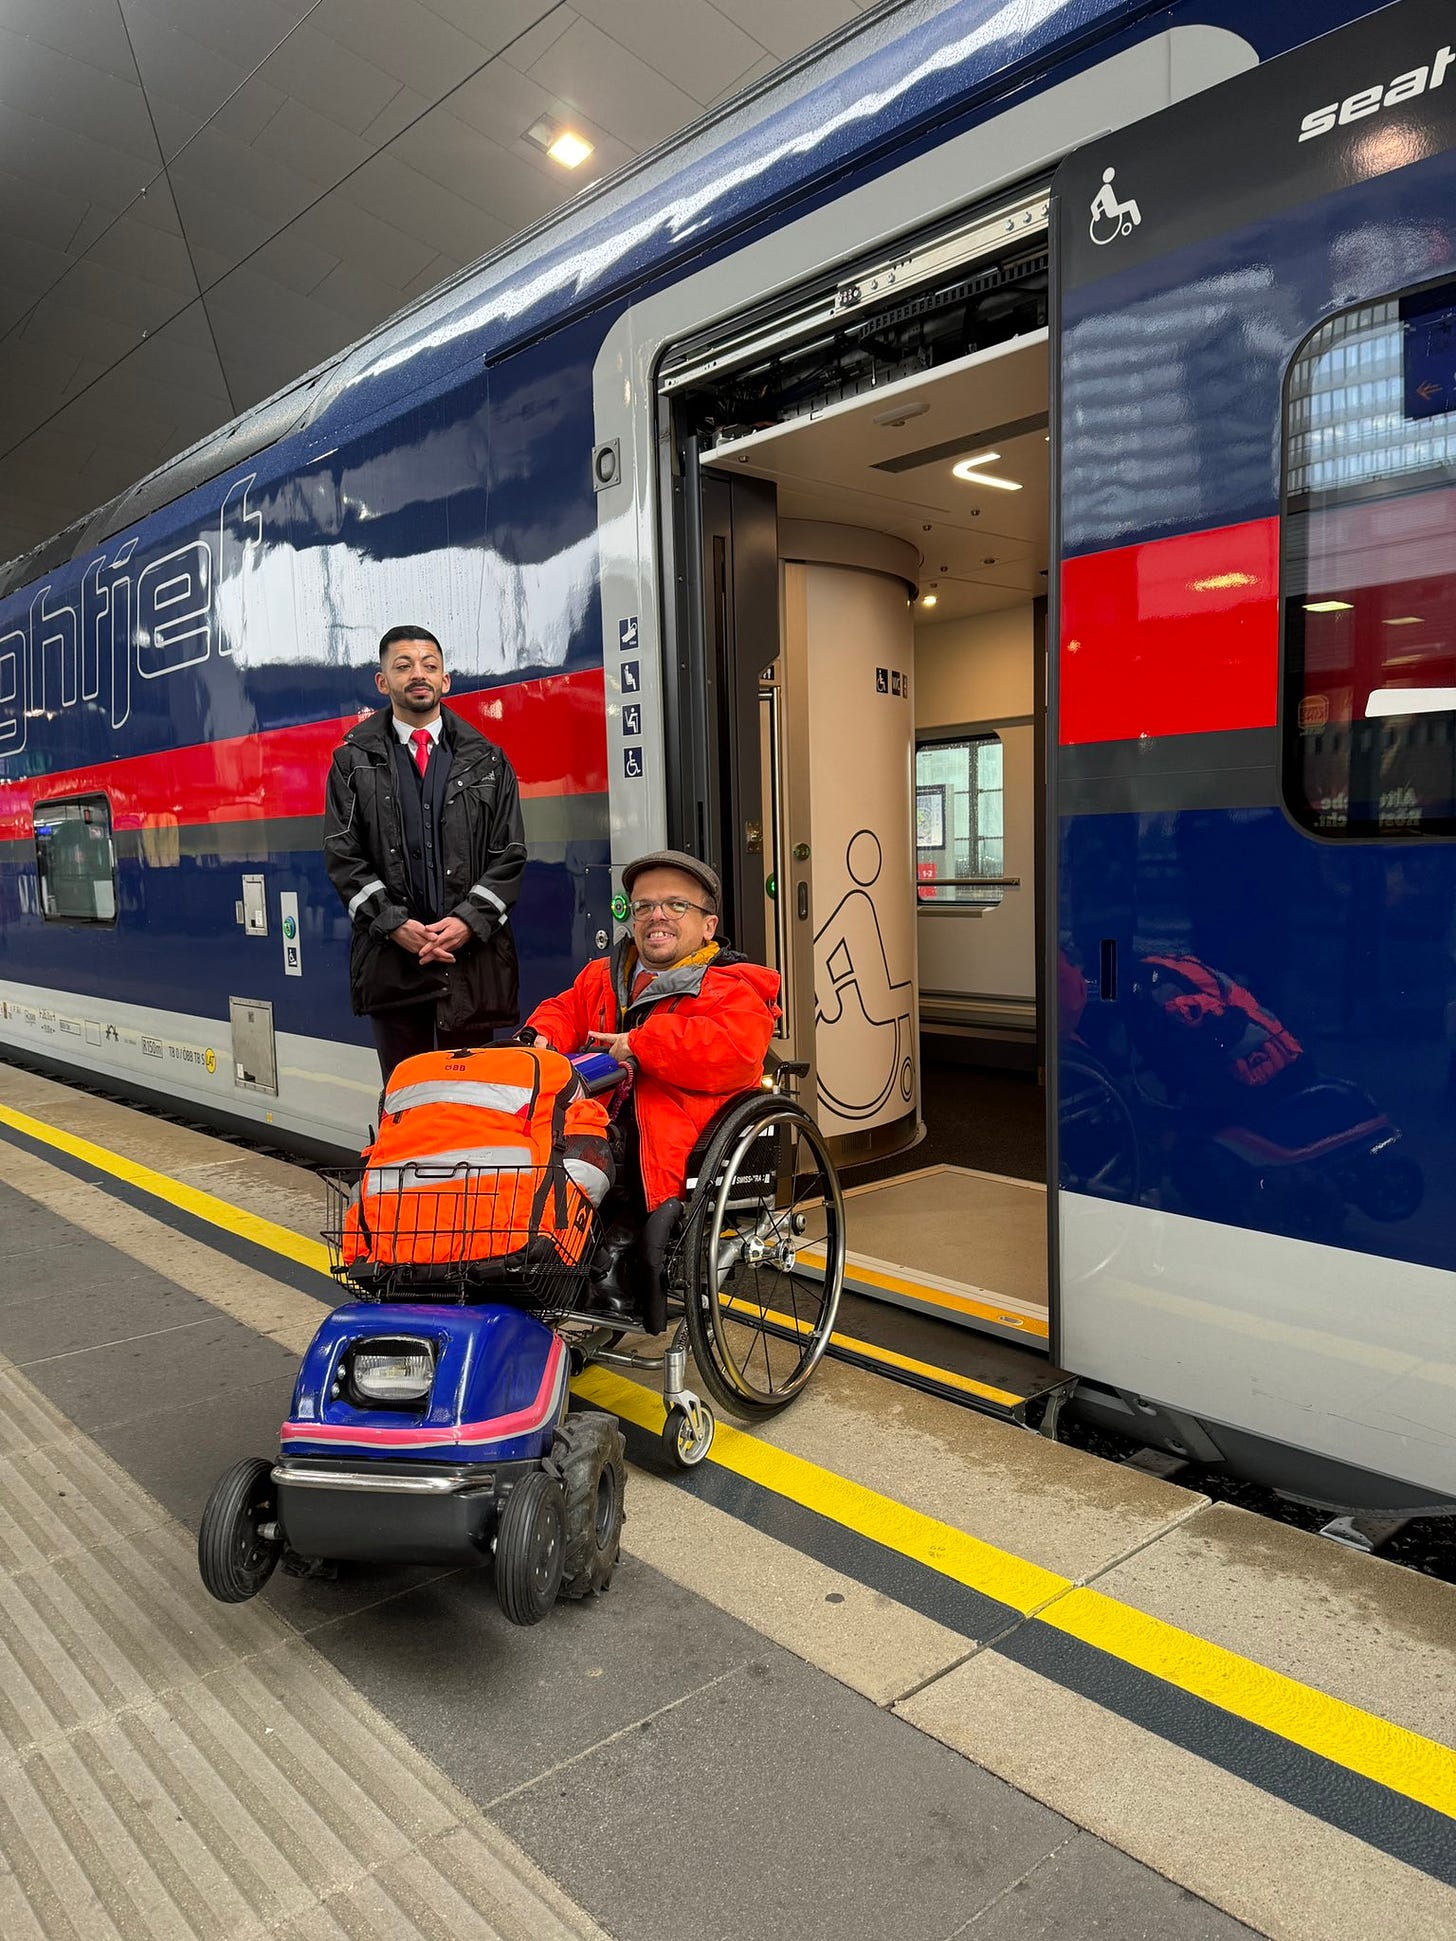 Wheelchair user Andreas Pöschek together with a train manager at the open door of the new nightjet. Andreas has a small wheelchair with an electric attachement at the front and a big orange bag on top of it. The entrance is flat with a small ramp.